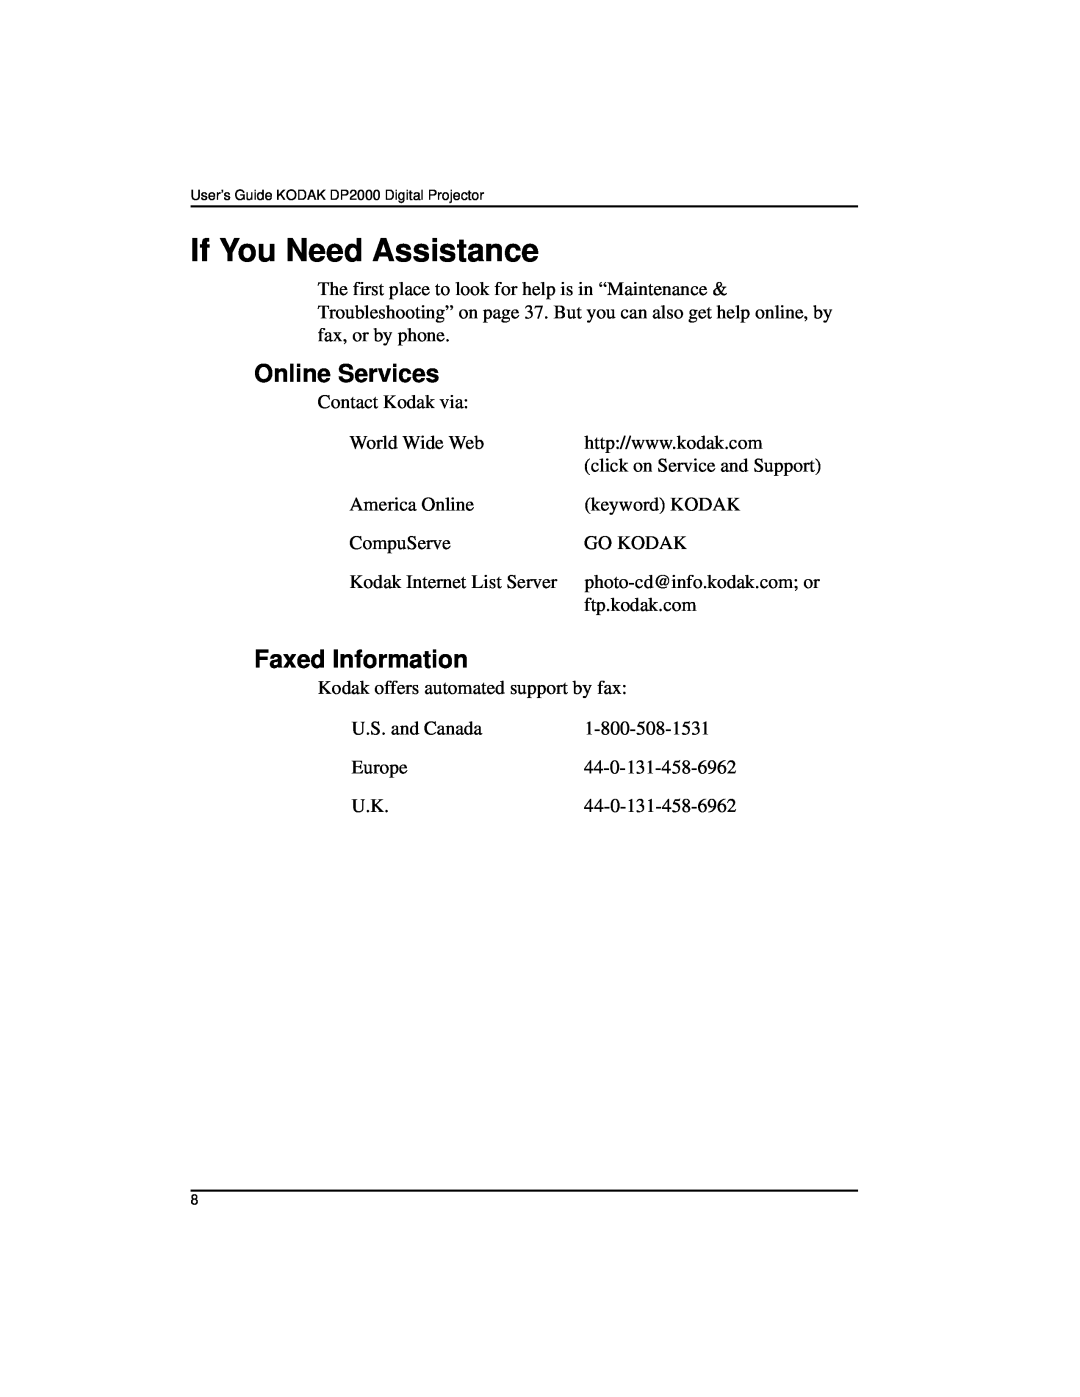 Kodak DP2000 manual If You Need Assistance, Online Services, Faxed Information 